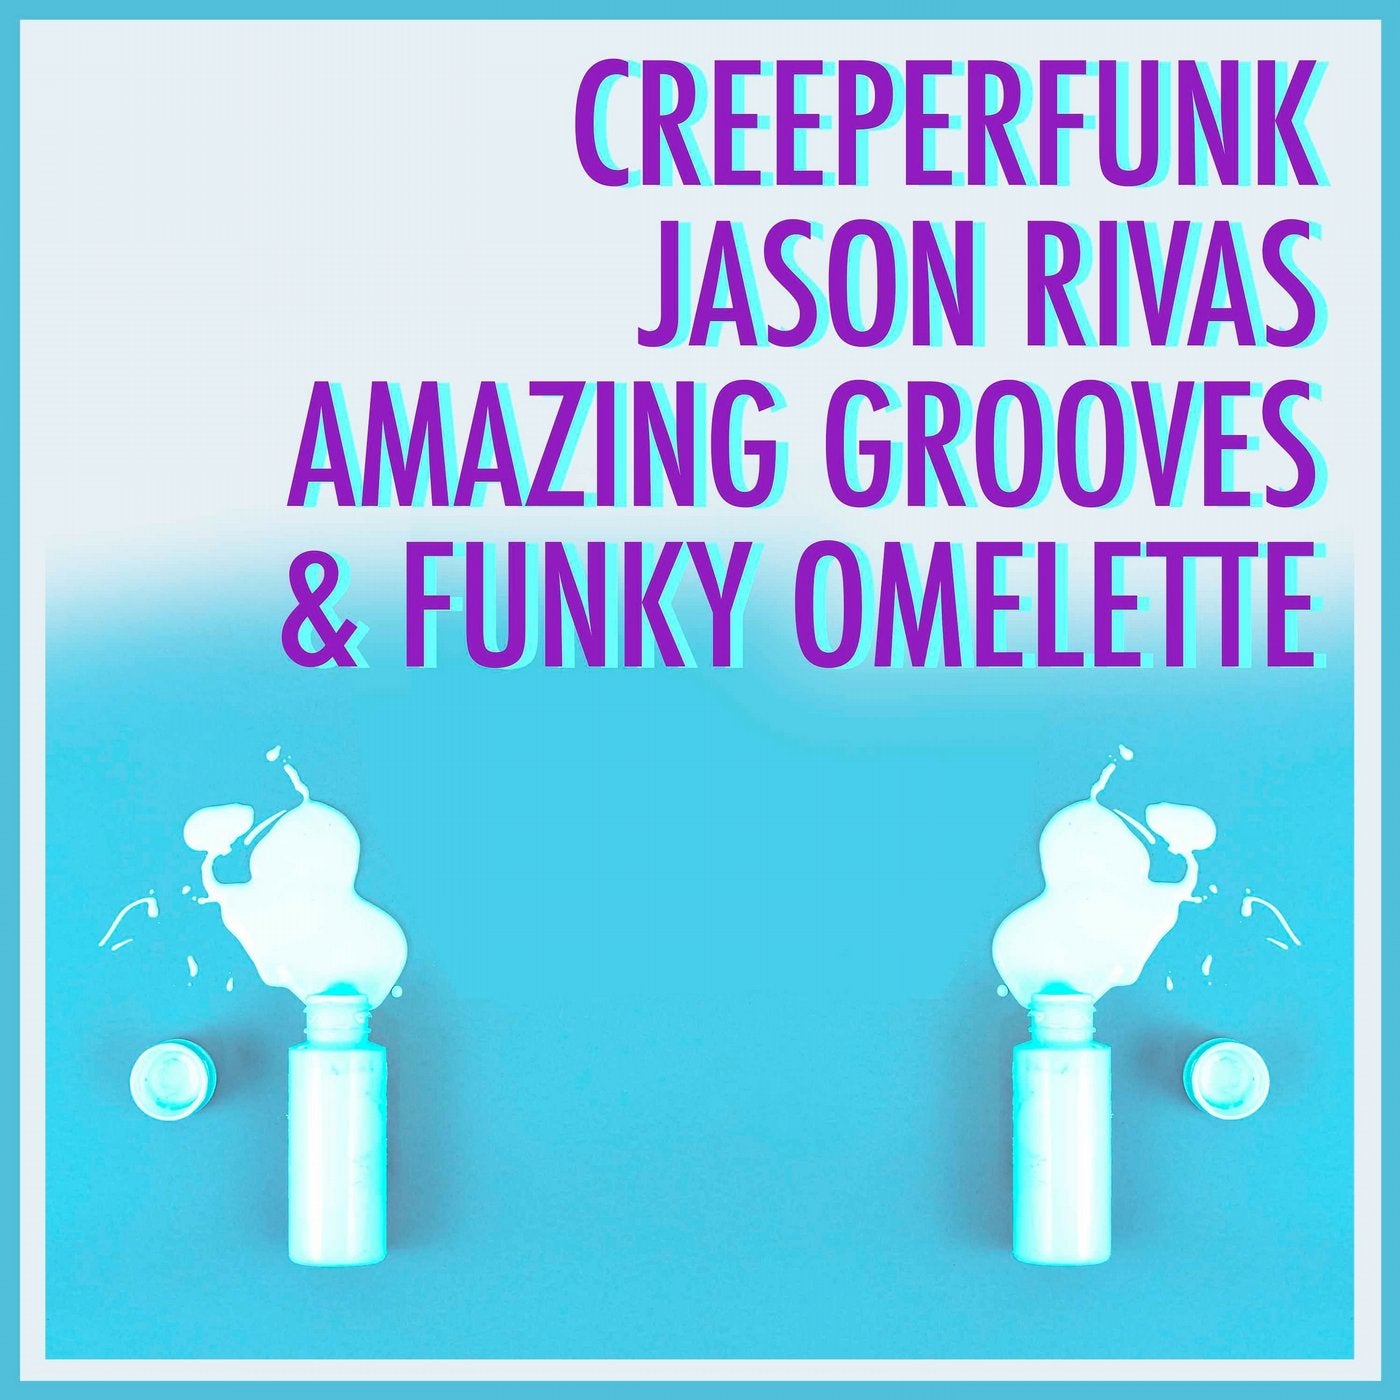 Amazing Grooves & Funky Omelette